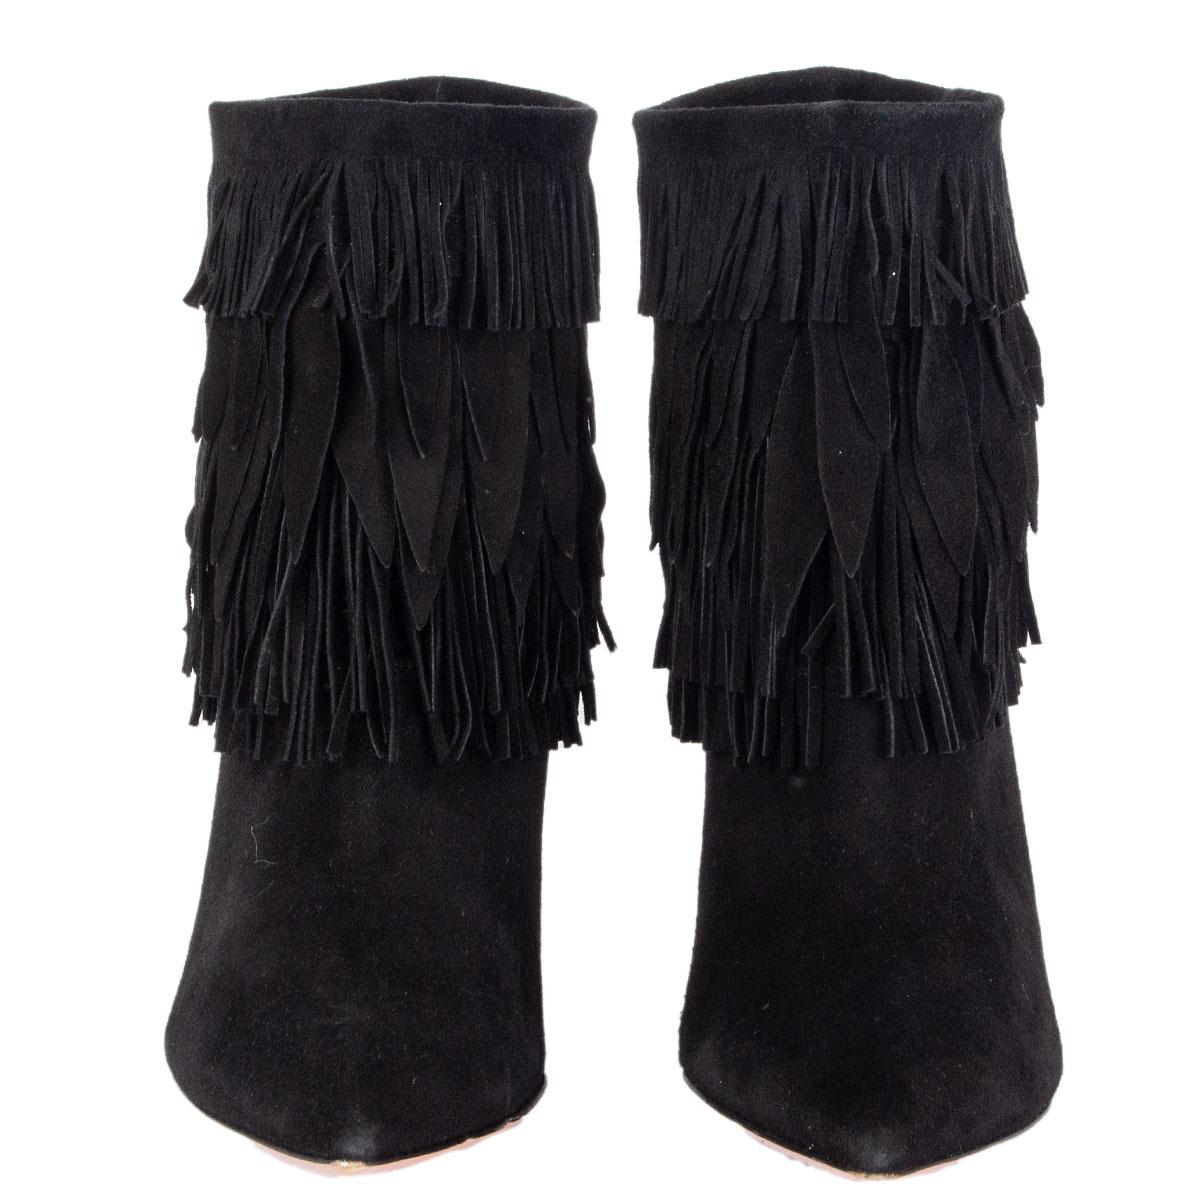 100% authentic Aquazzura Sasha fringed pointed-toe ankle-boots in black suede. Have been worn once and are in excellent condition.

Imprinted Size	37.5
Shoe Size	37.5
Inside Sole	24cm (9.4in)
Width	7cm (2.7in)
Heel	8.5cm (3.3in)

All our listings